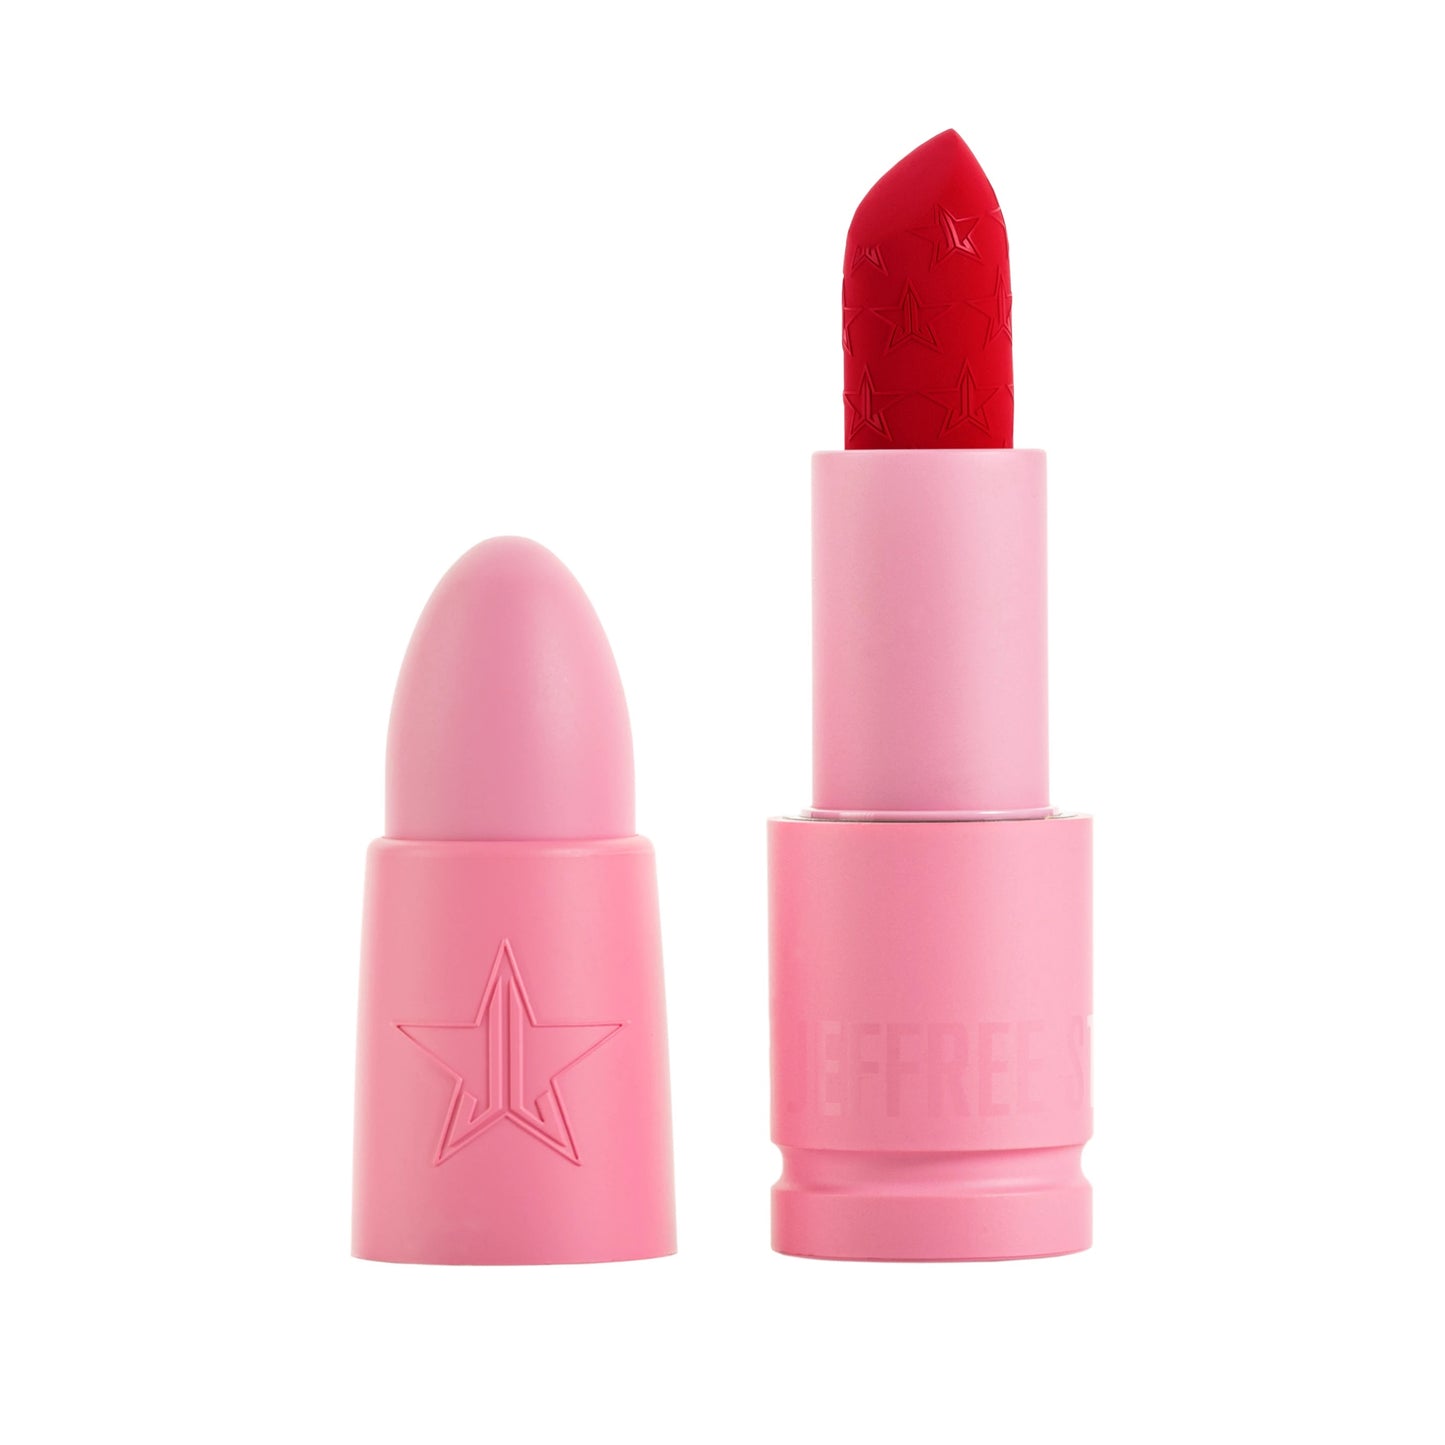 The Perfect Red | Velvet Trap Jeffree Star Cosmetics